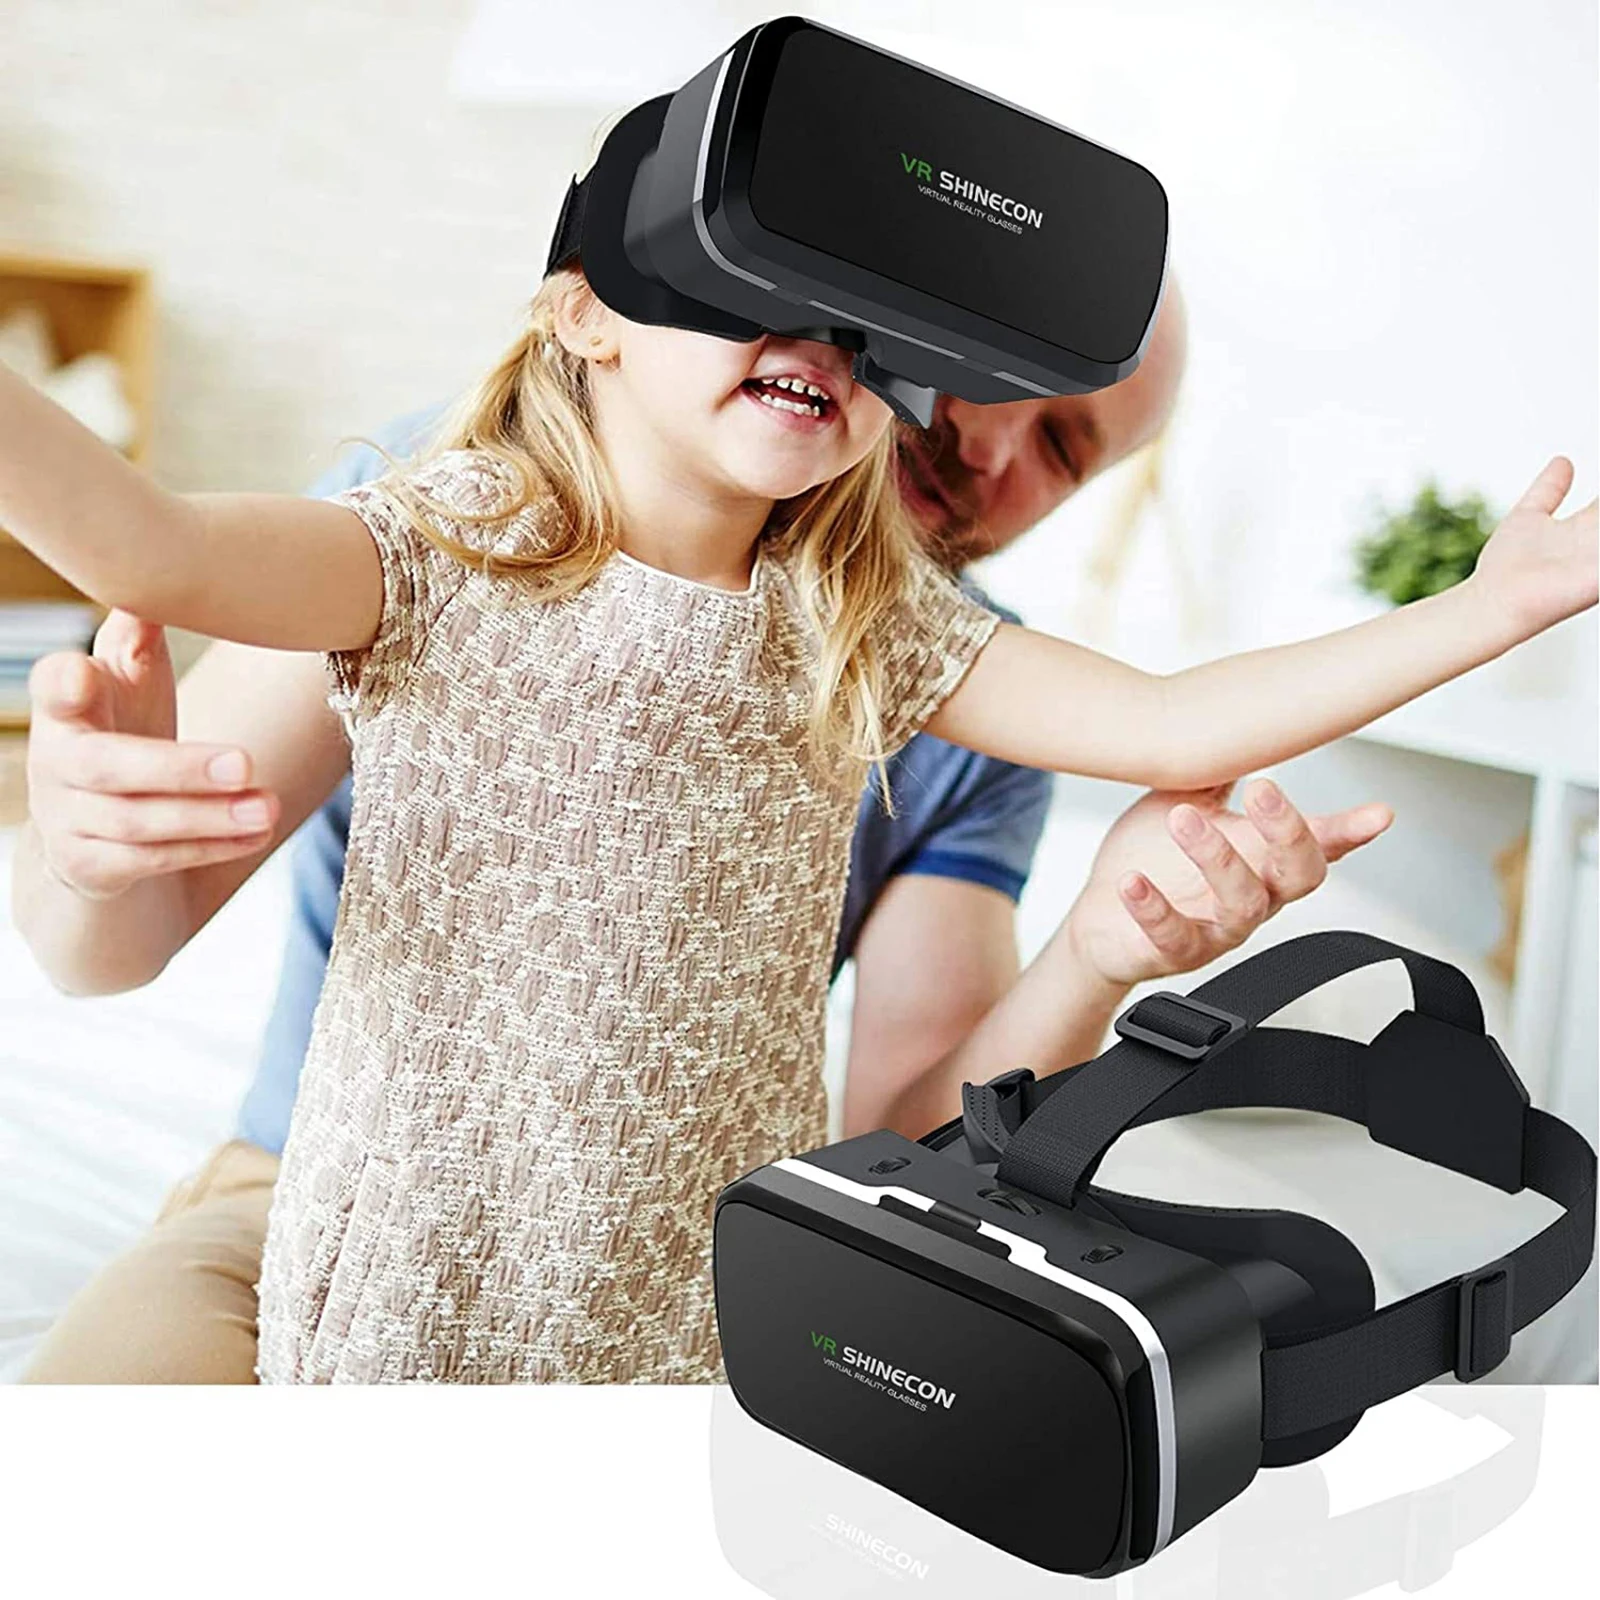 

3d Glasses Virtual Reality Goggles 360 Movies For Smartphone Vr Headset With Controller Vr Headsets Headsets